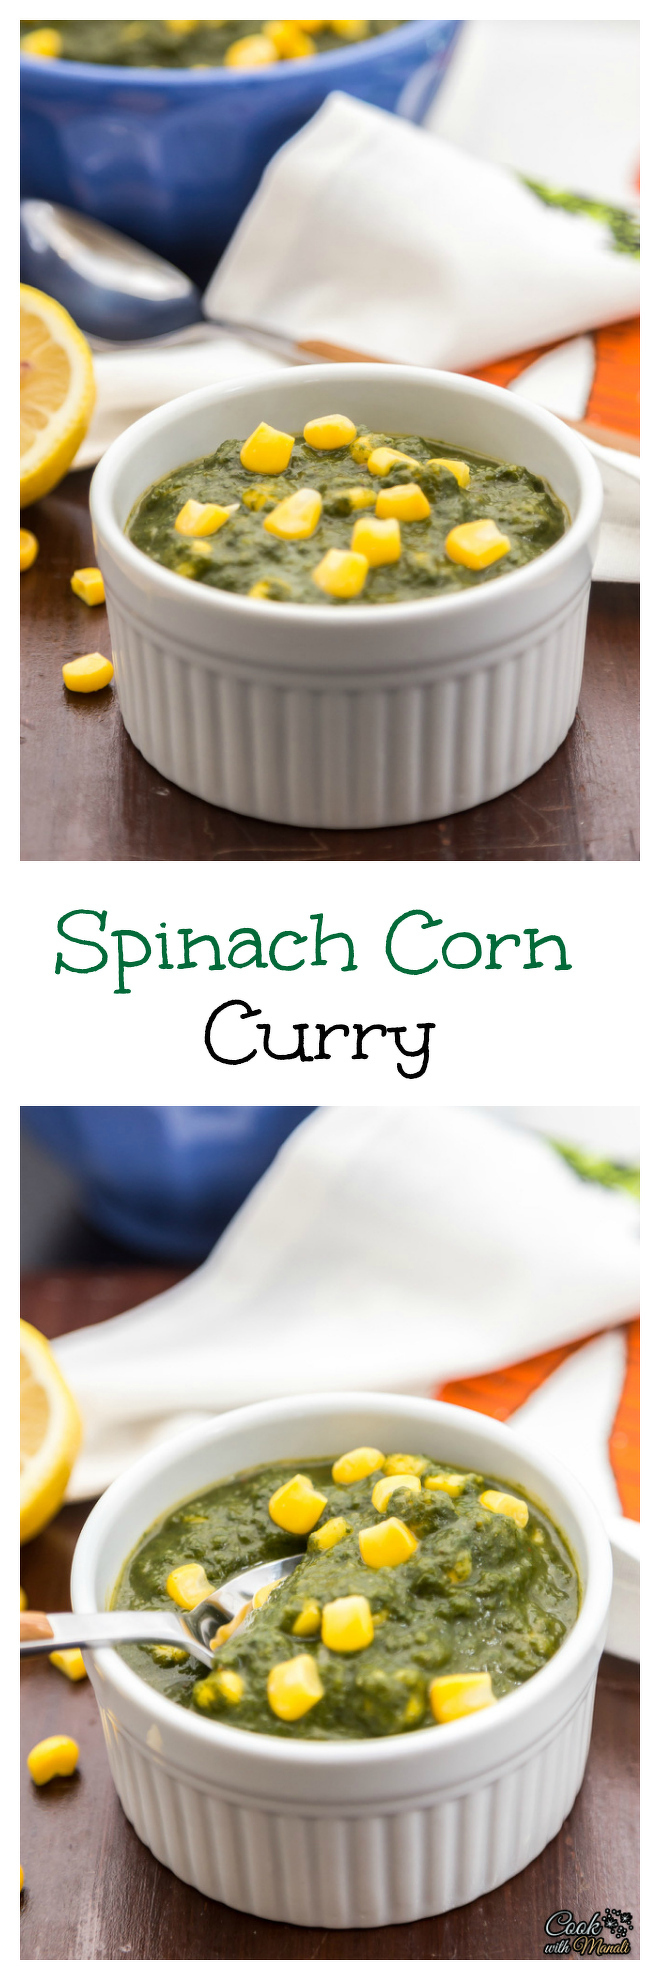 Spinach Corn Curry Collage-nocwm